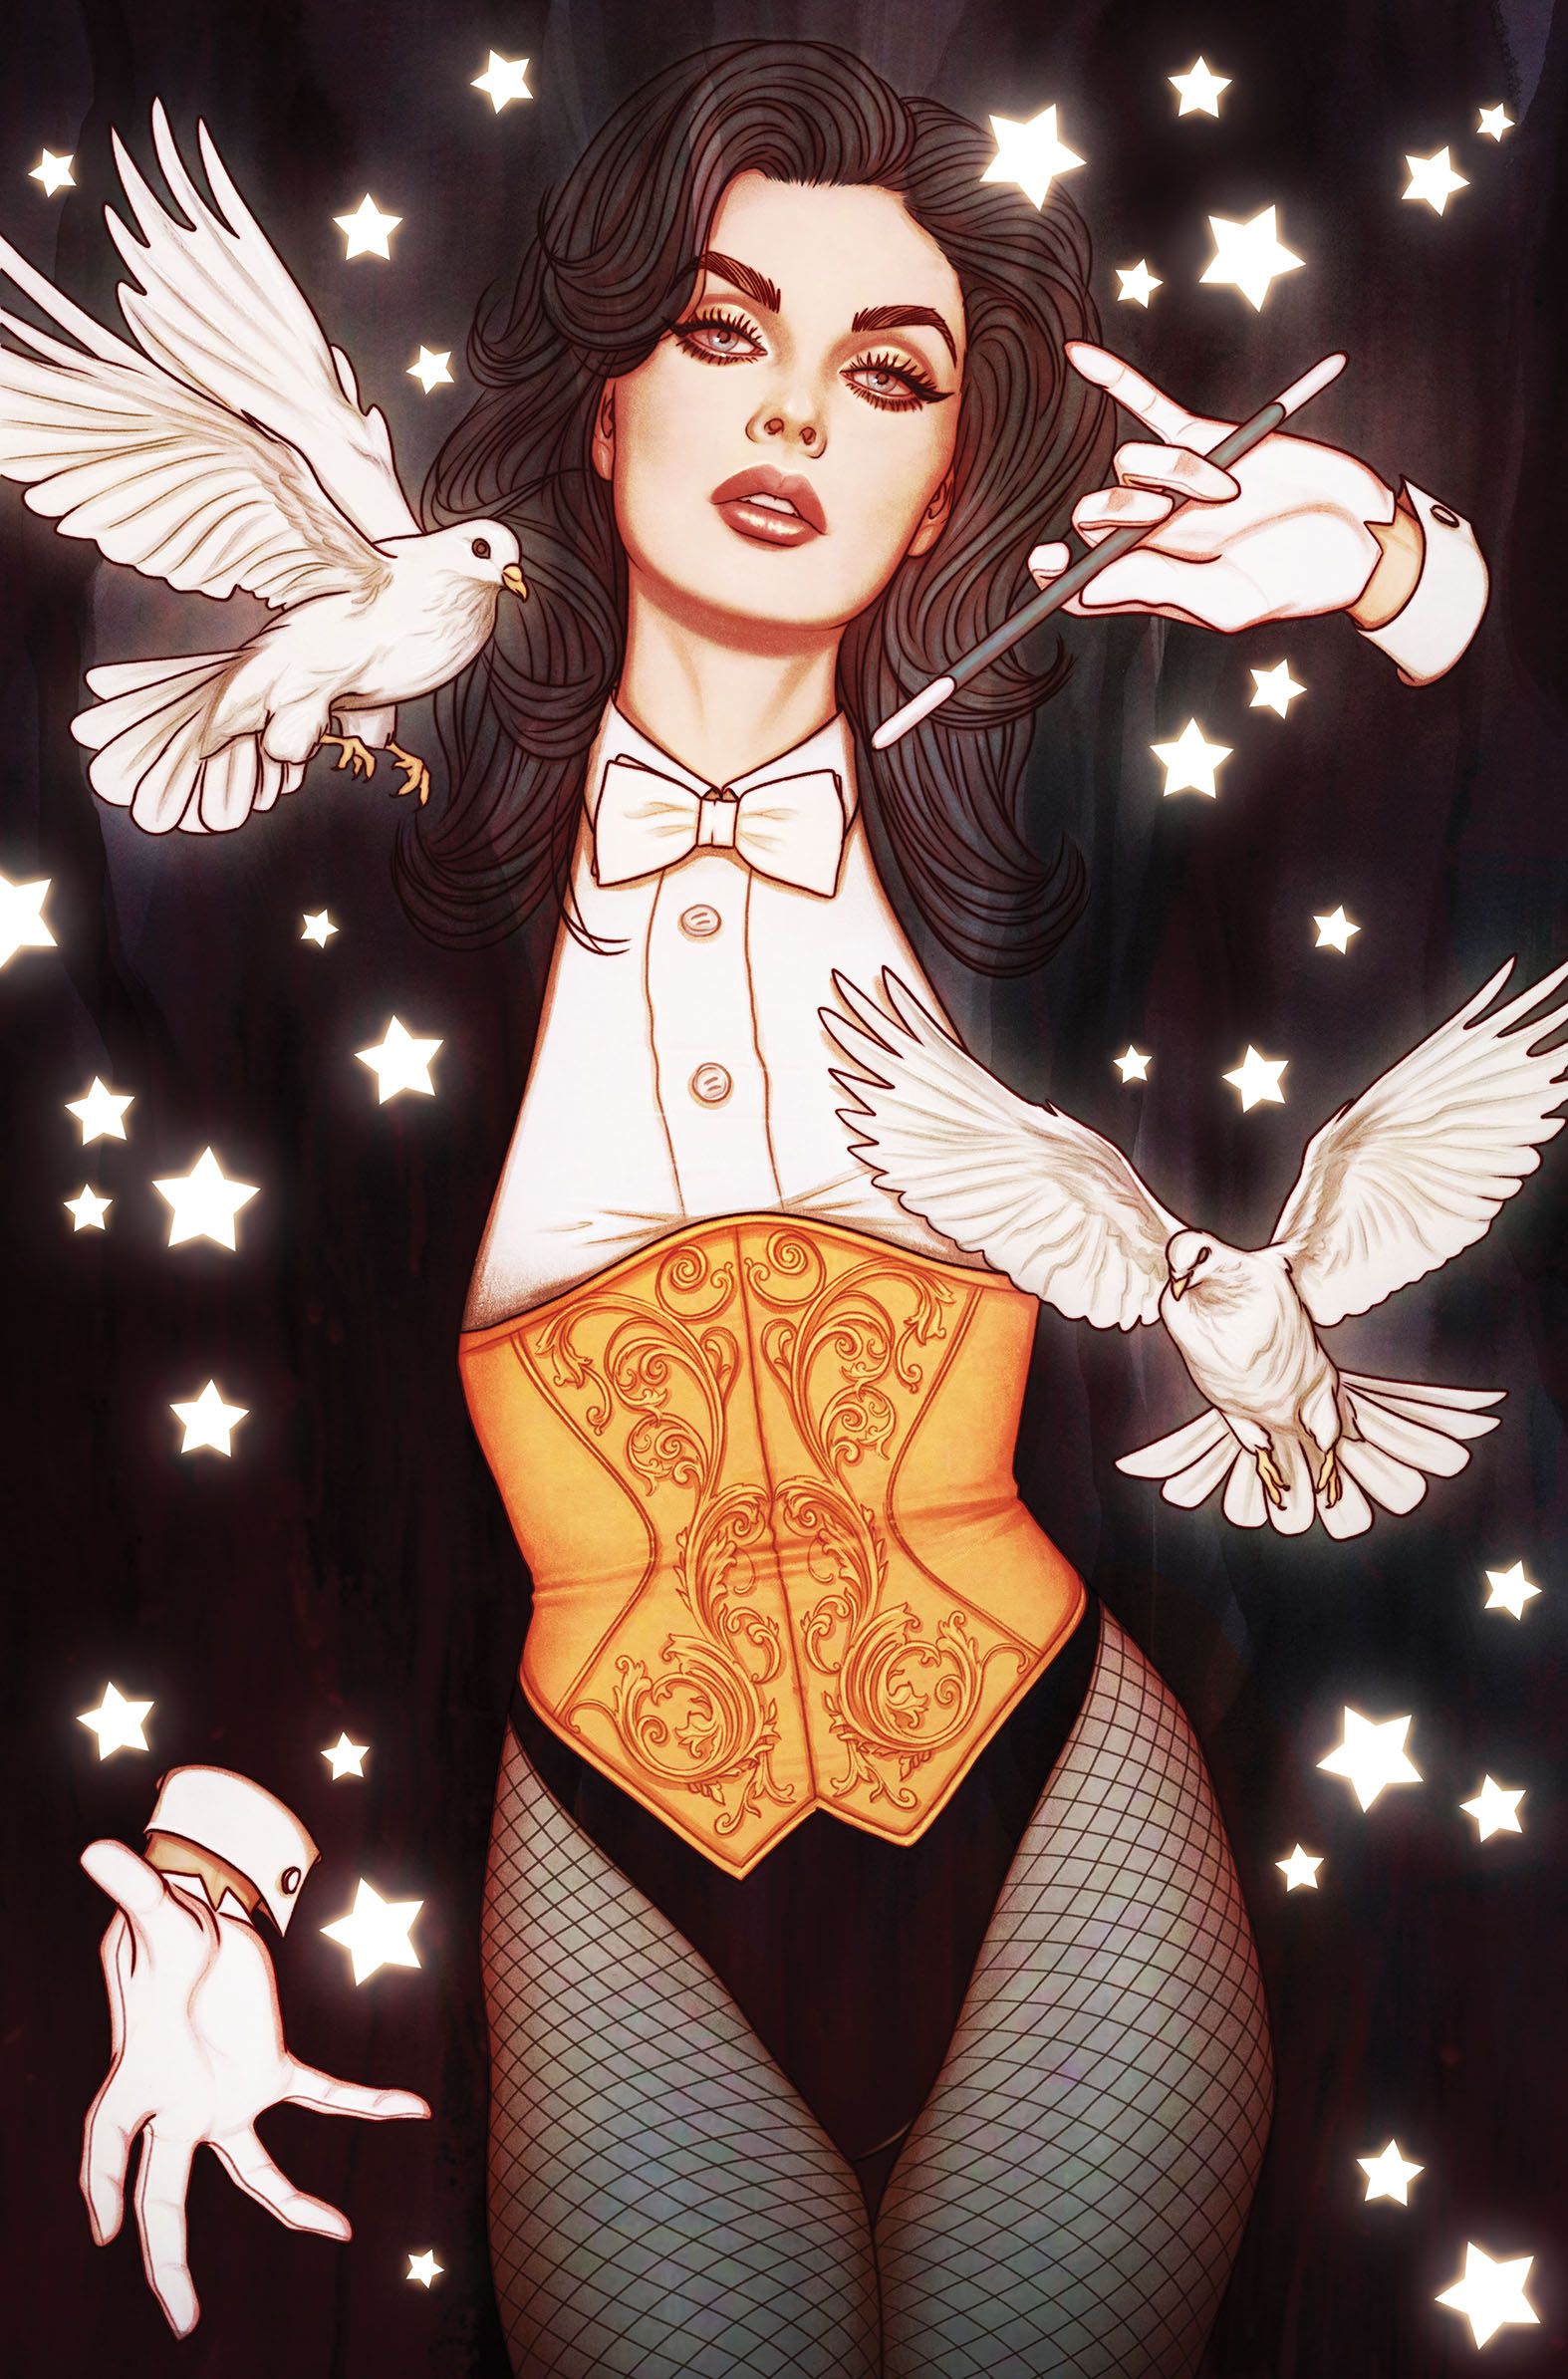 Zatanna Bring Down The House 2 Open to Order 1-25 (Frison)